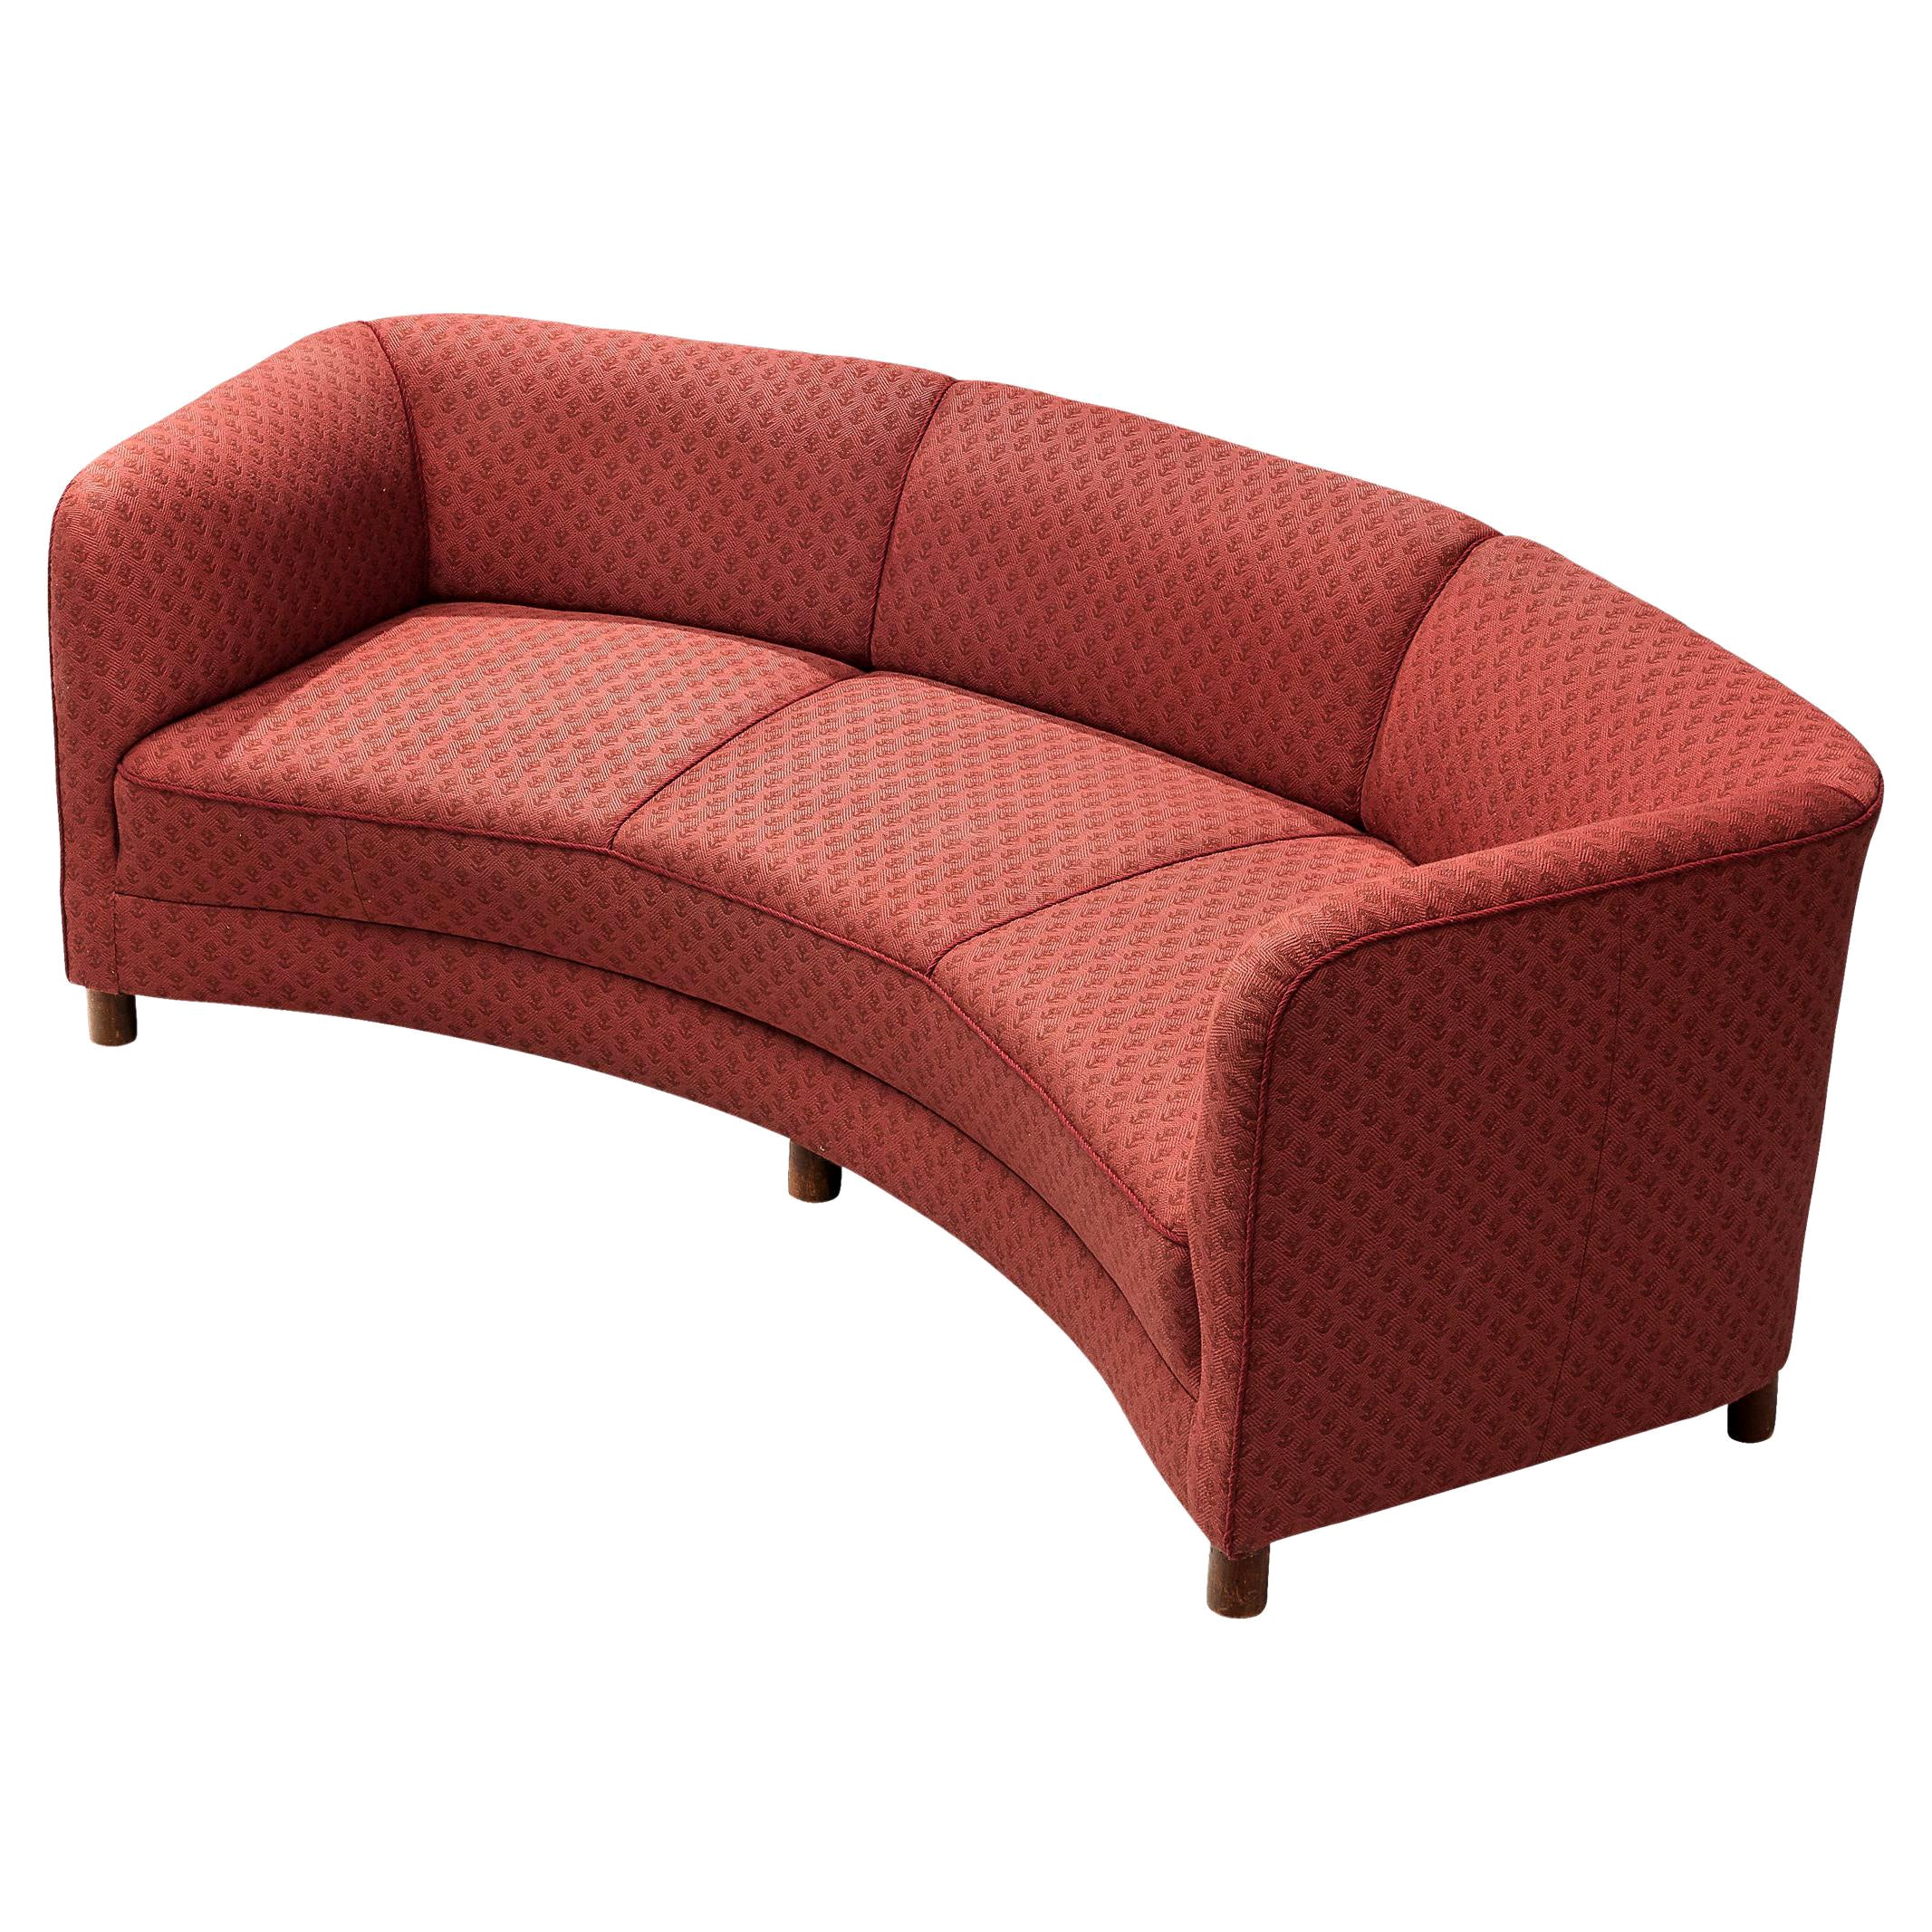 Danish Curved Sofa in Floral Red Upholstery